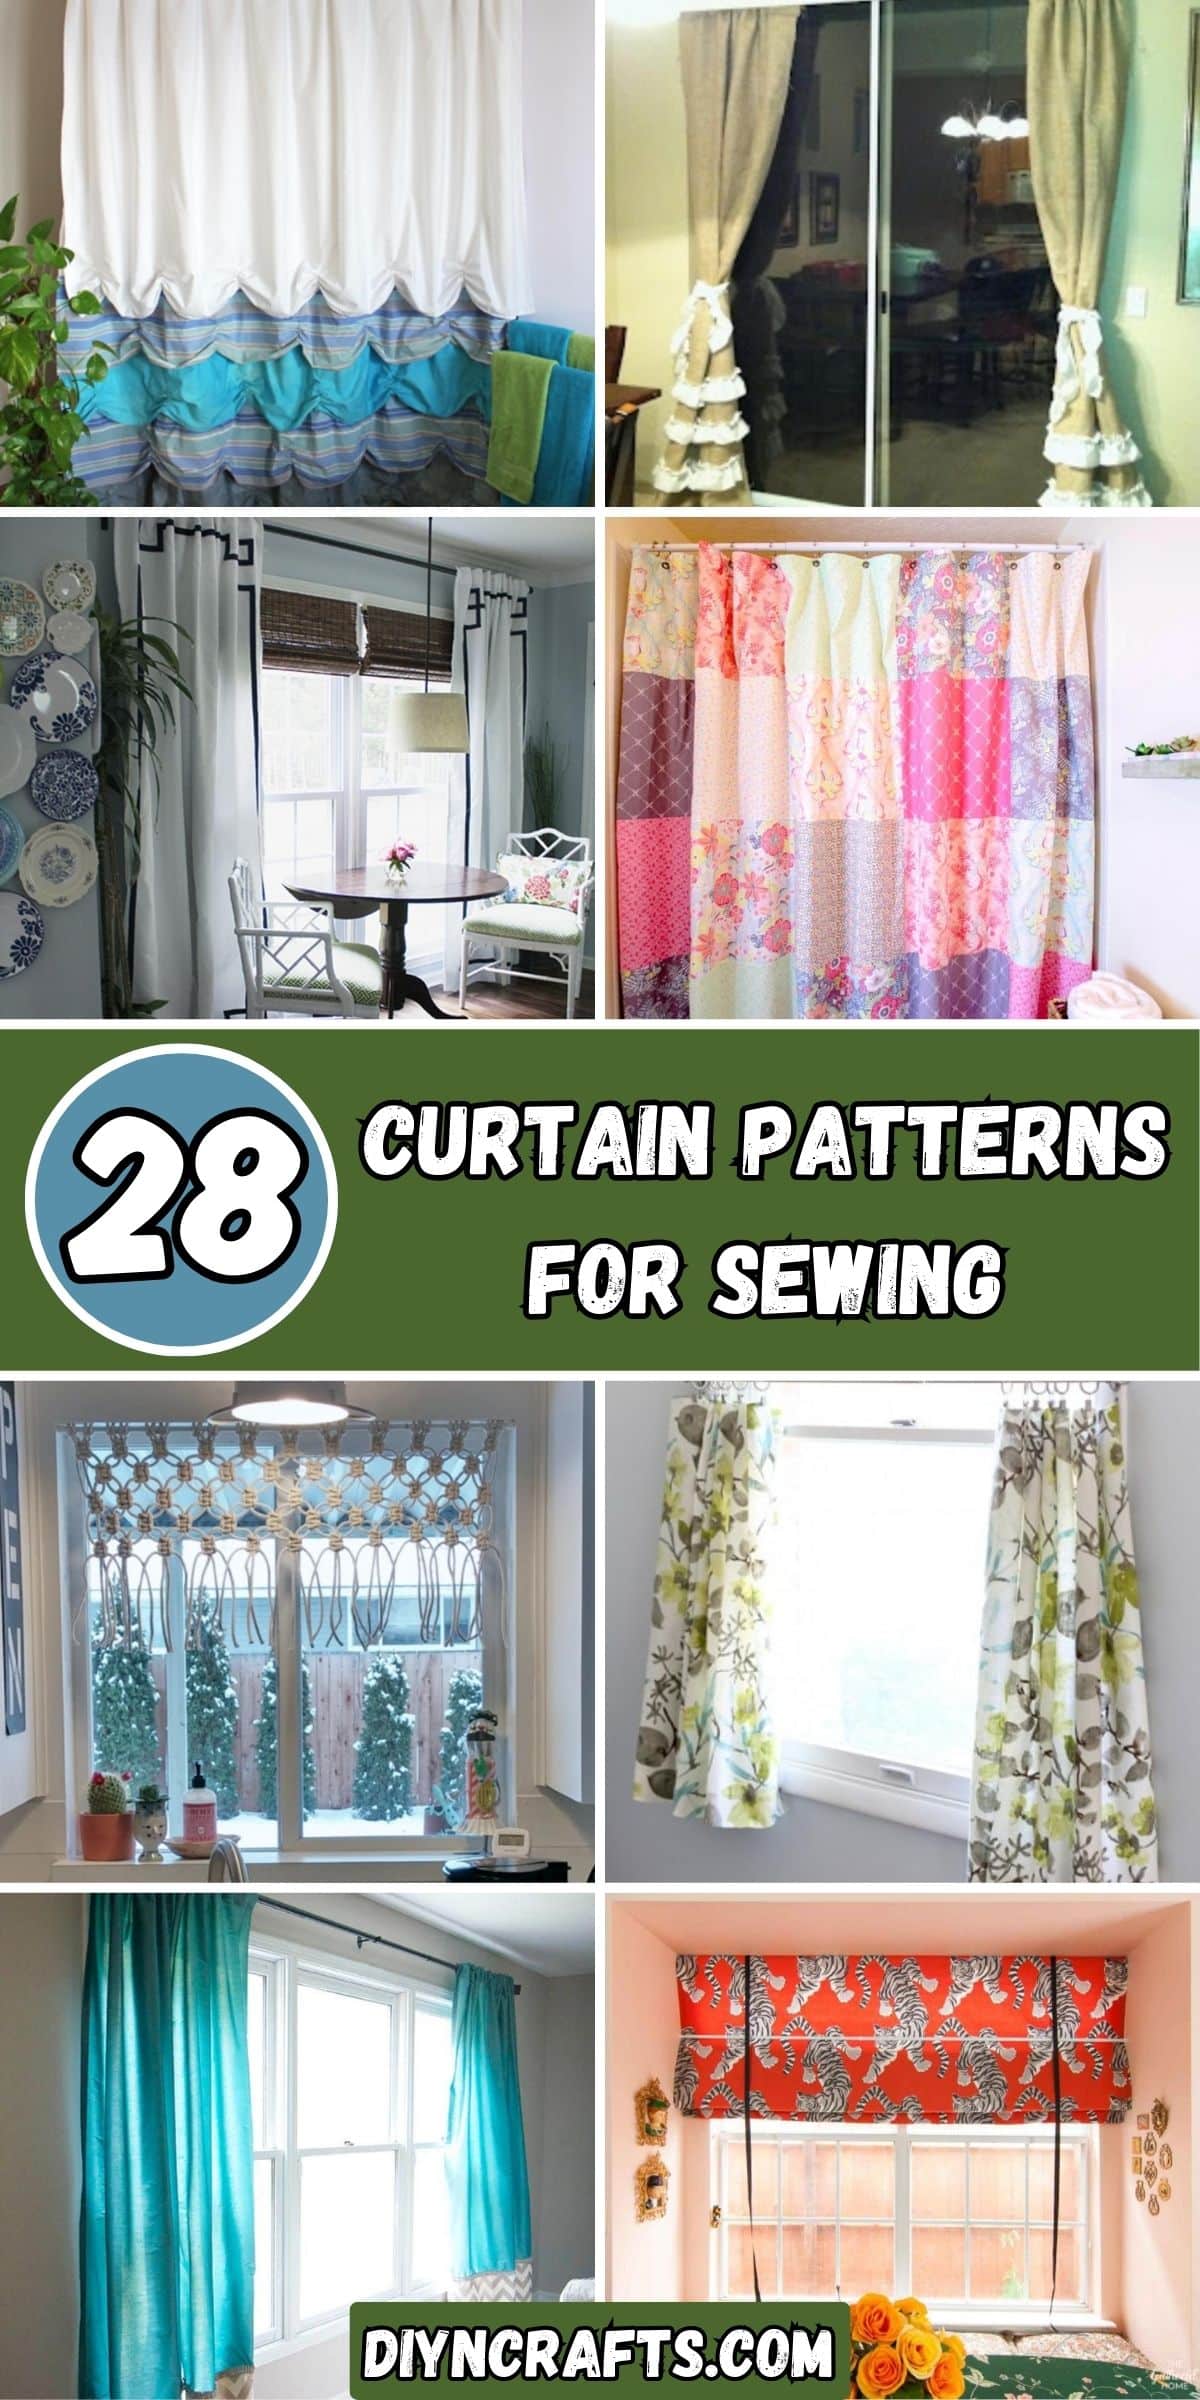 28 Curtain Patterns for Sewing collage.